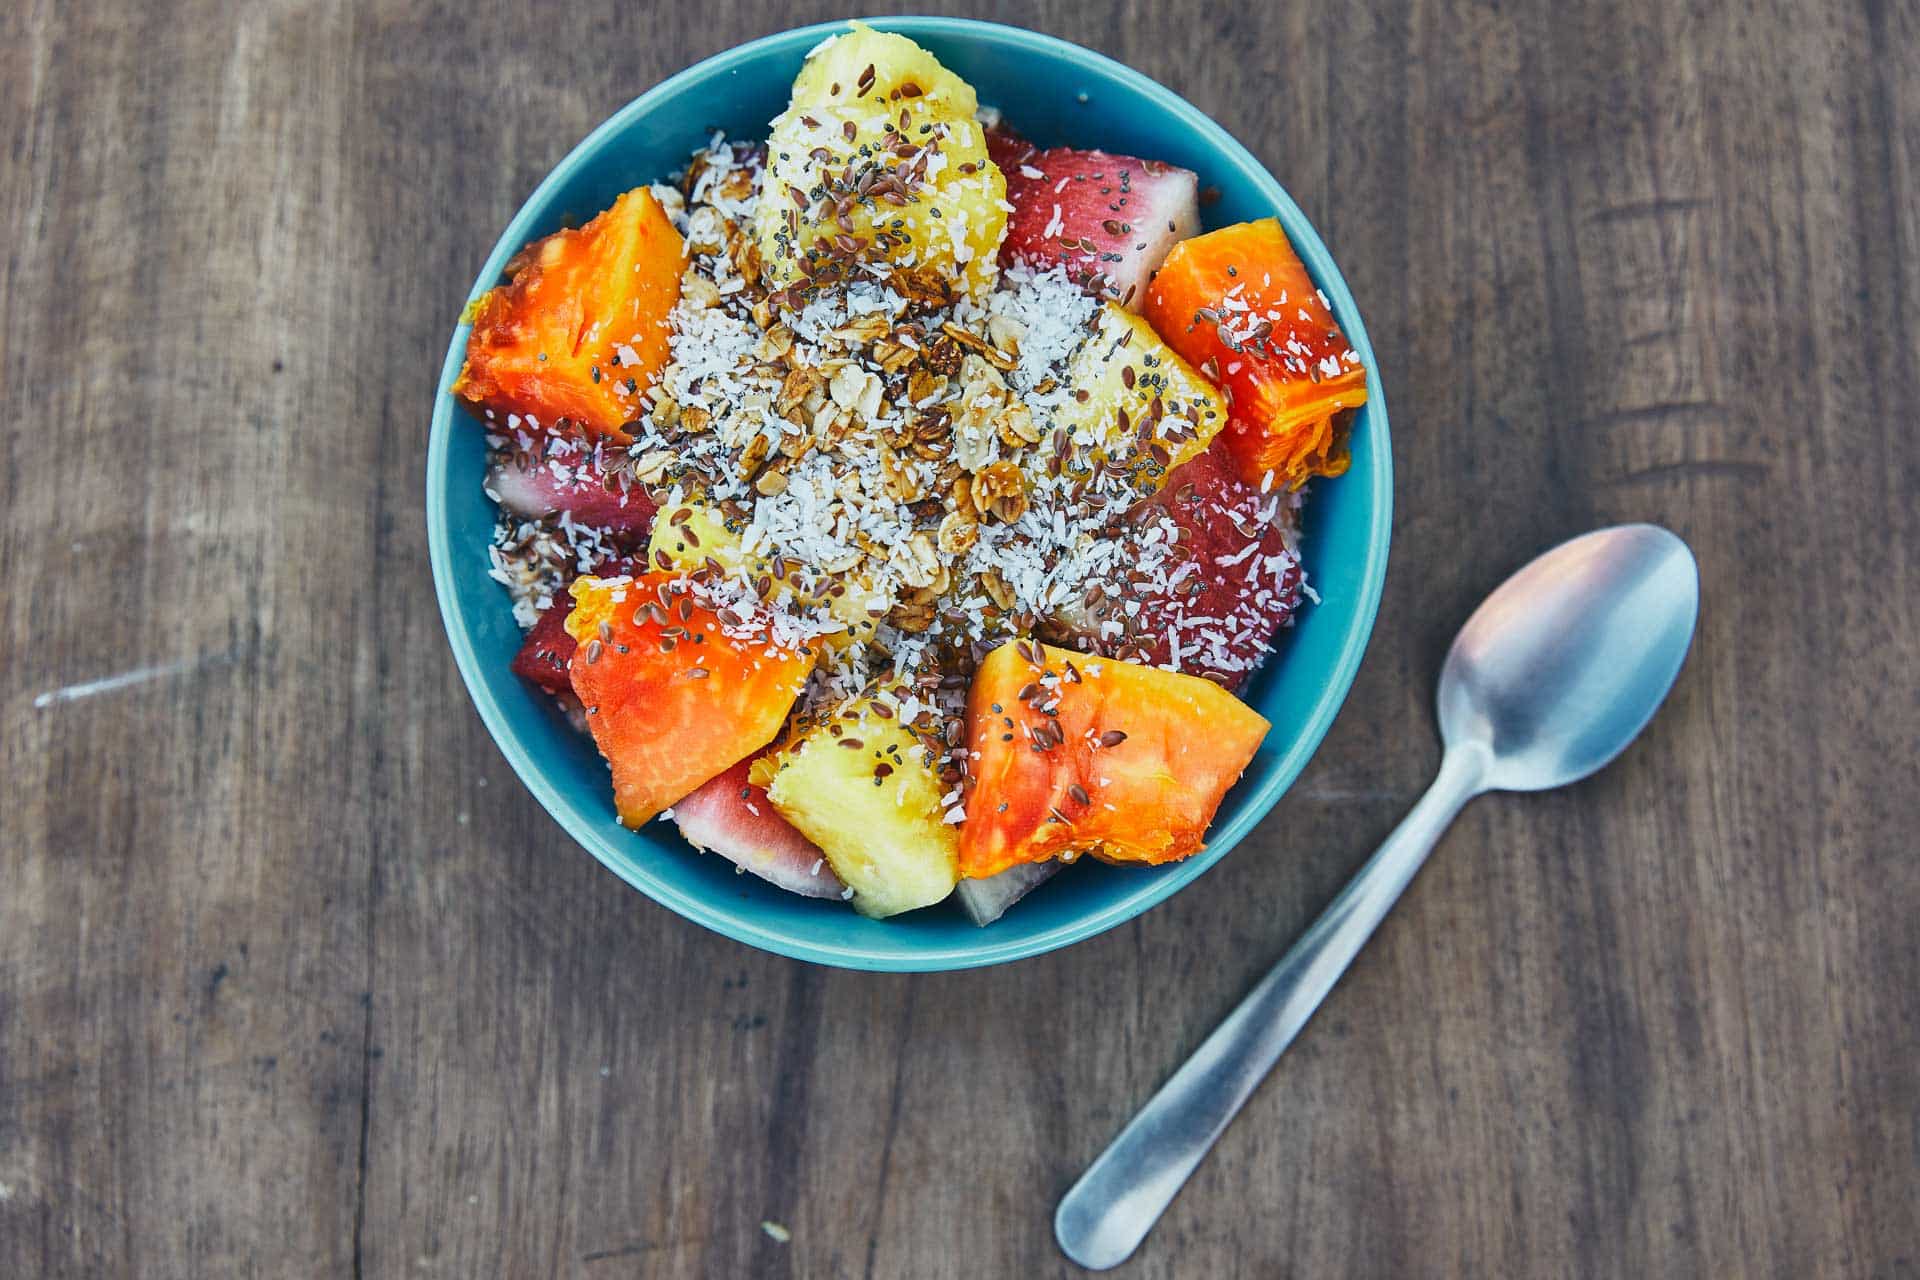 A superfood bowl with fruit and seeds